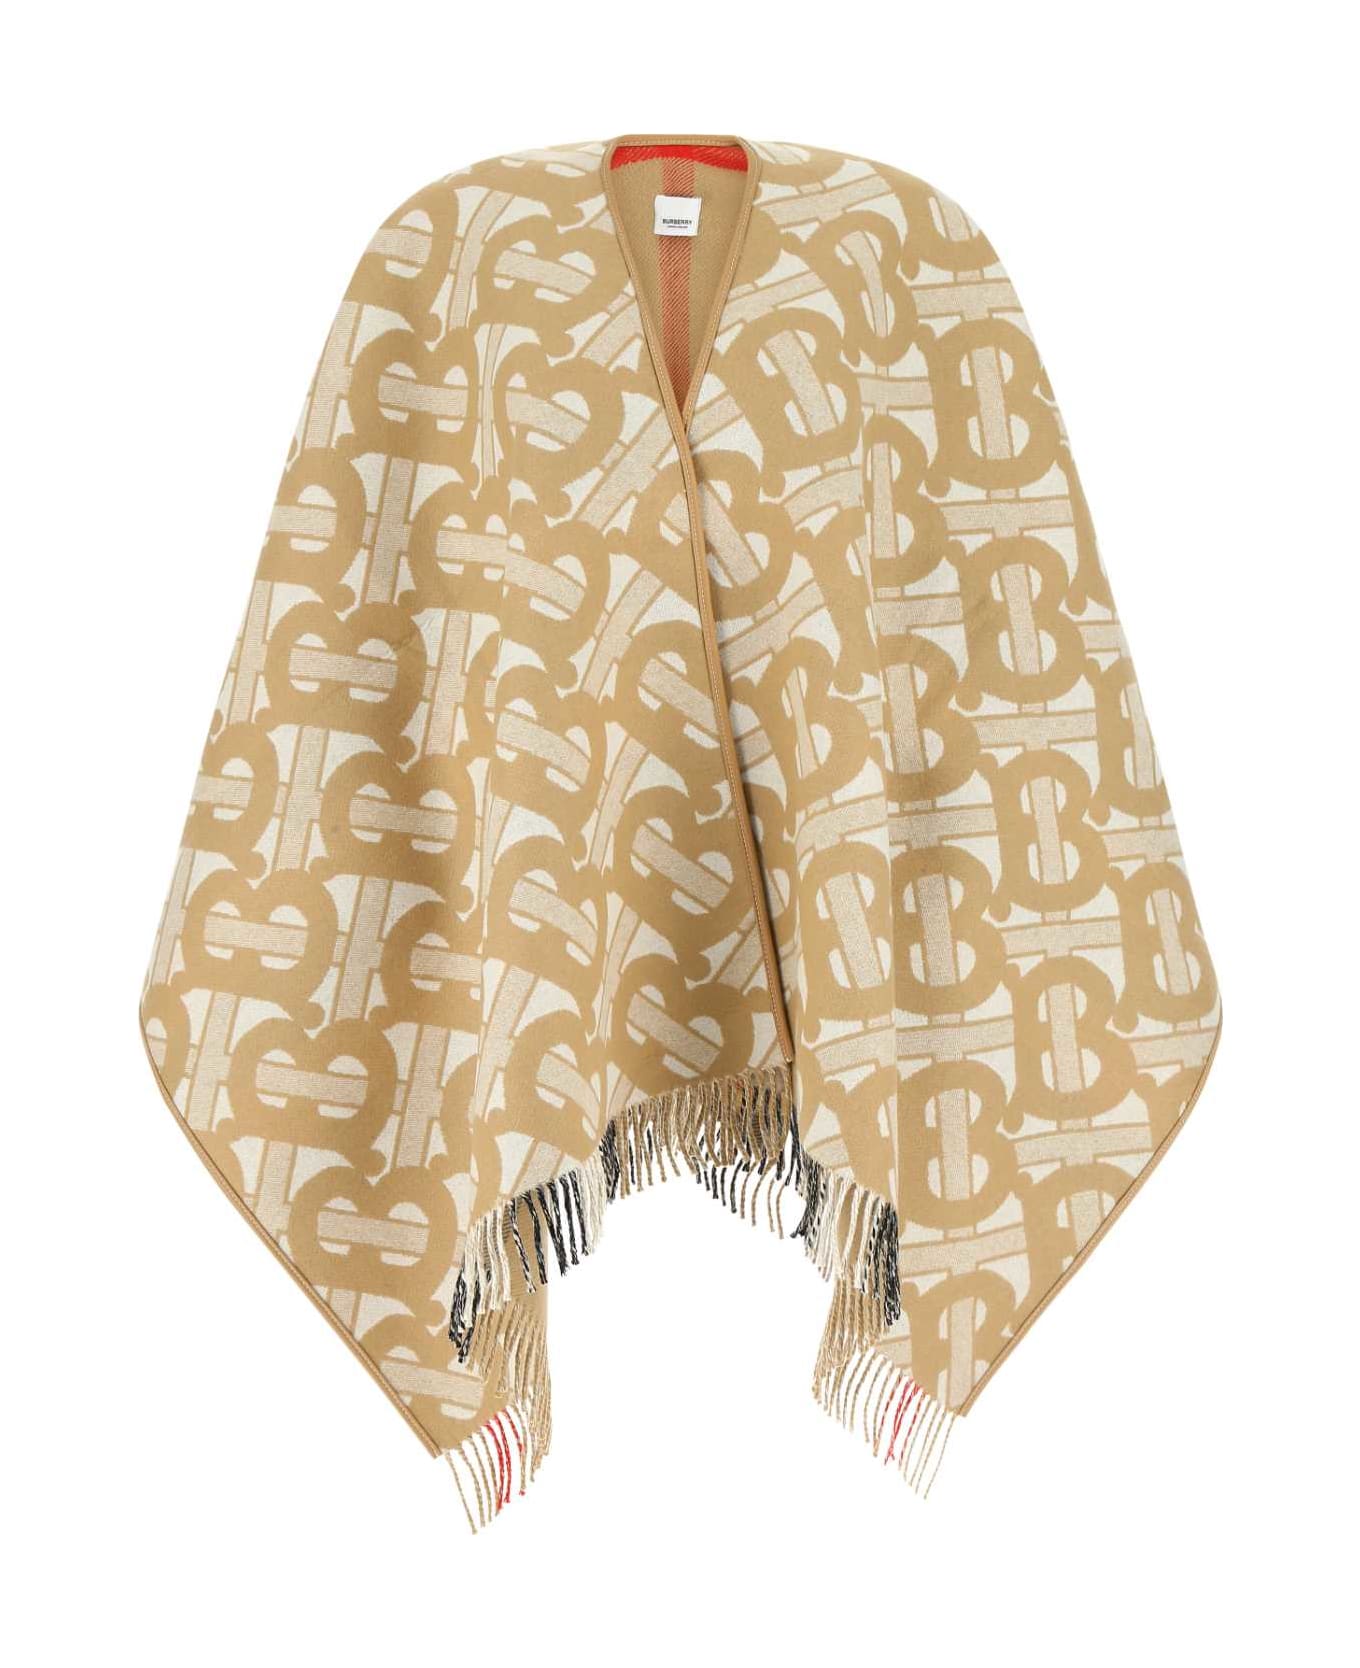 Burberry Embroidered Wool Blend Cape - A7026